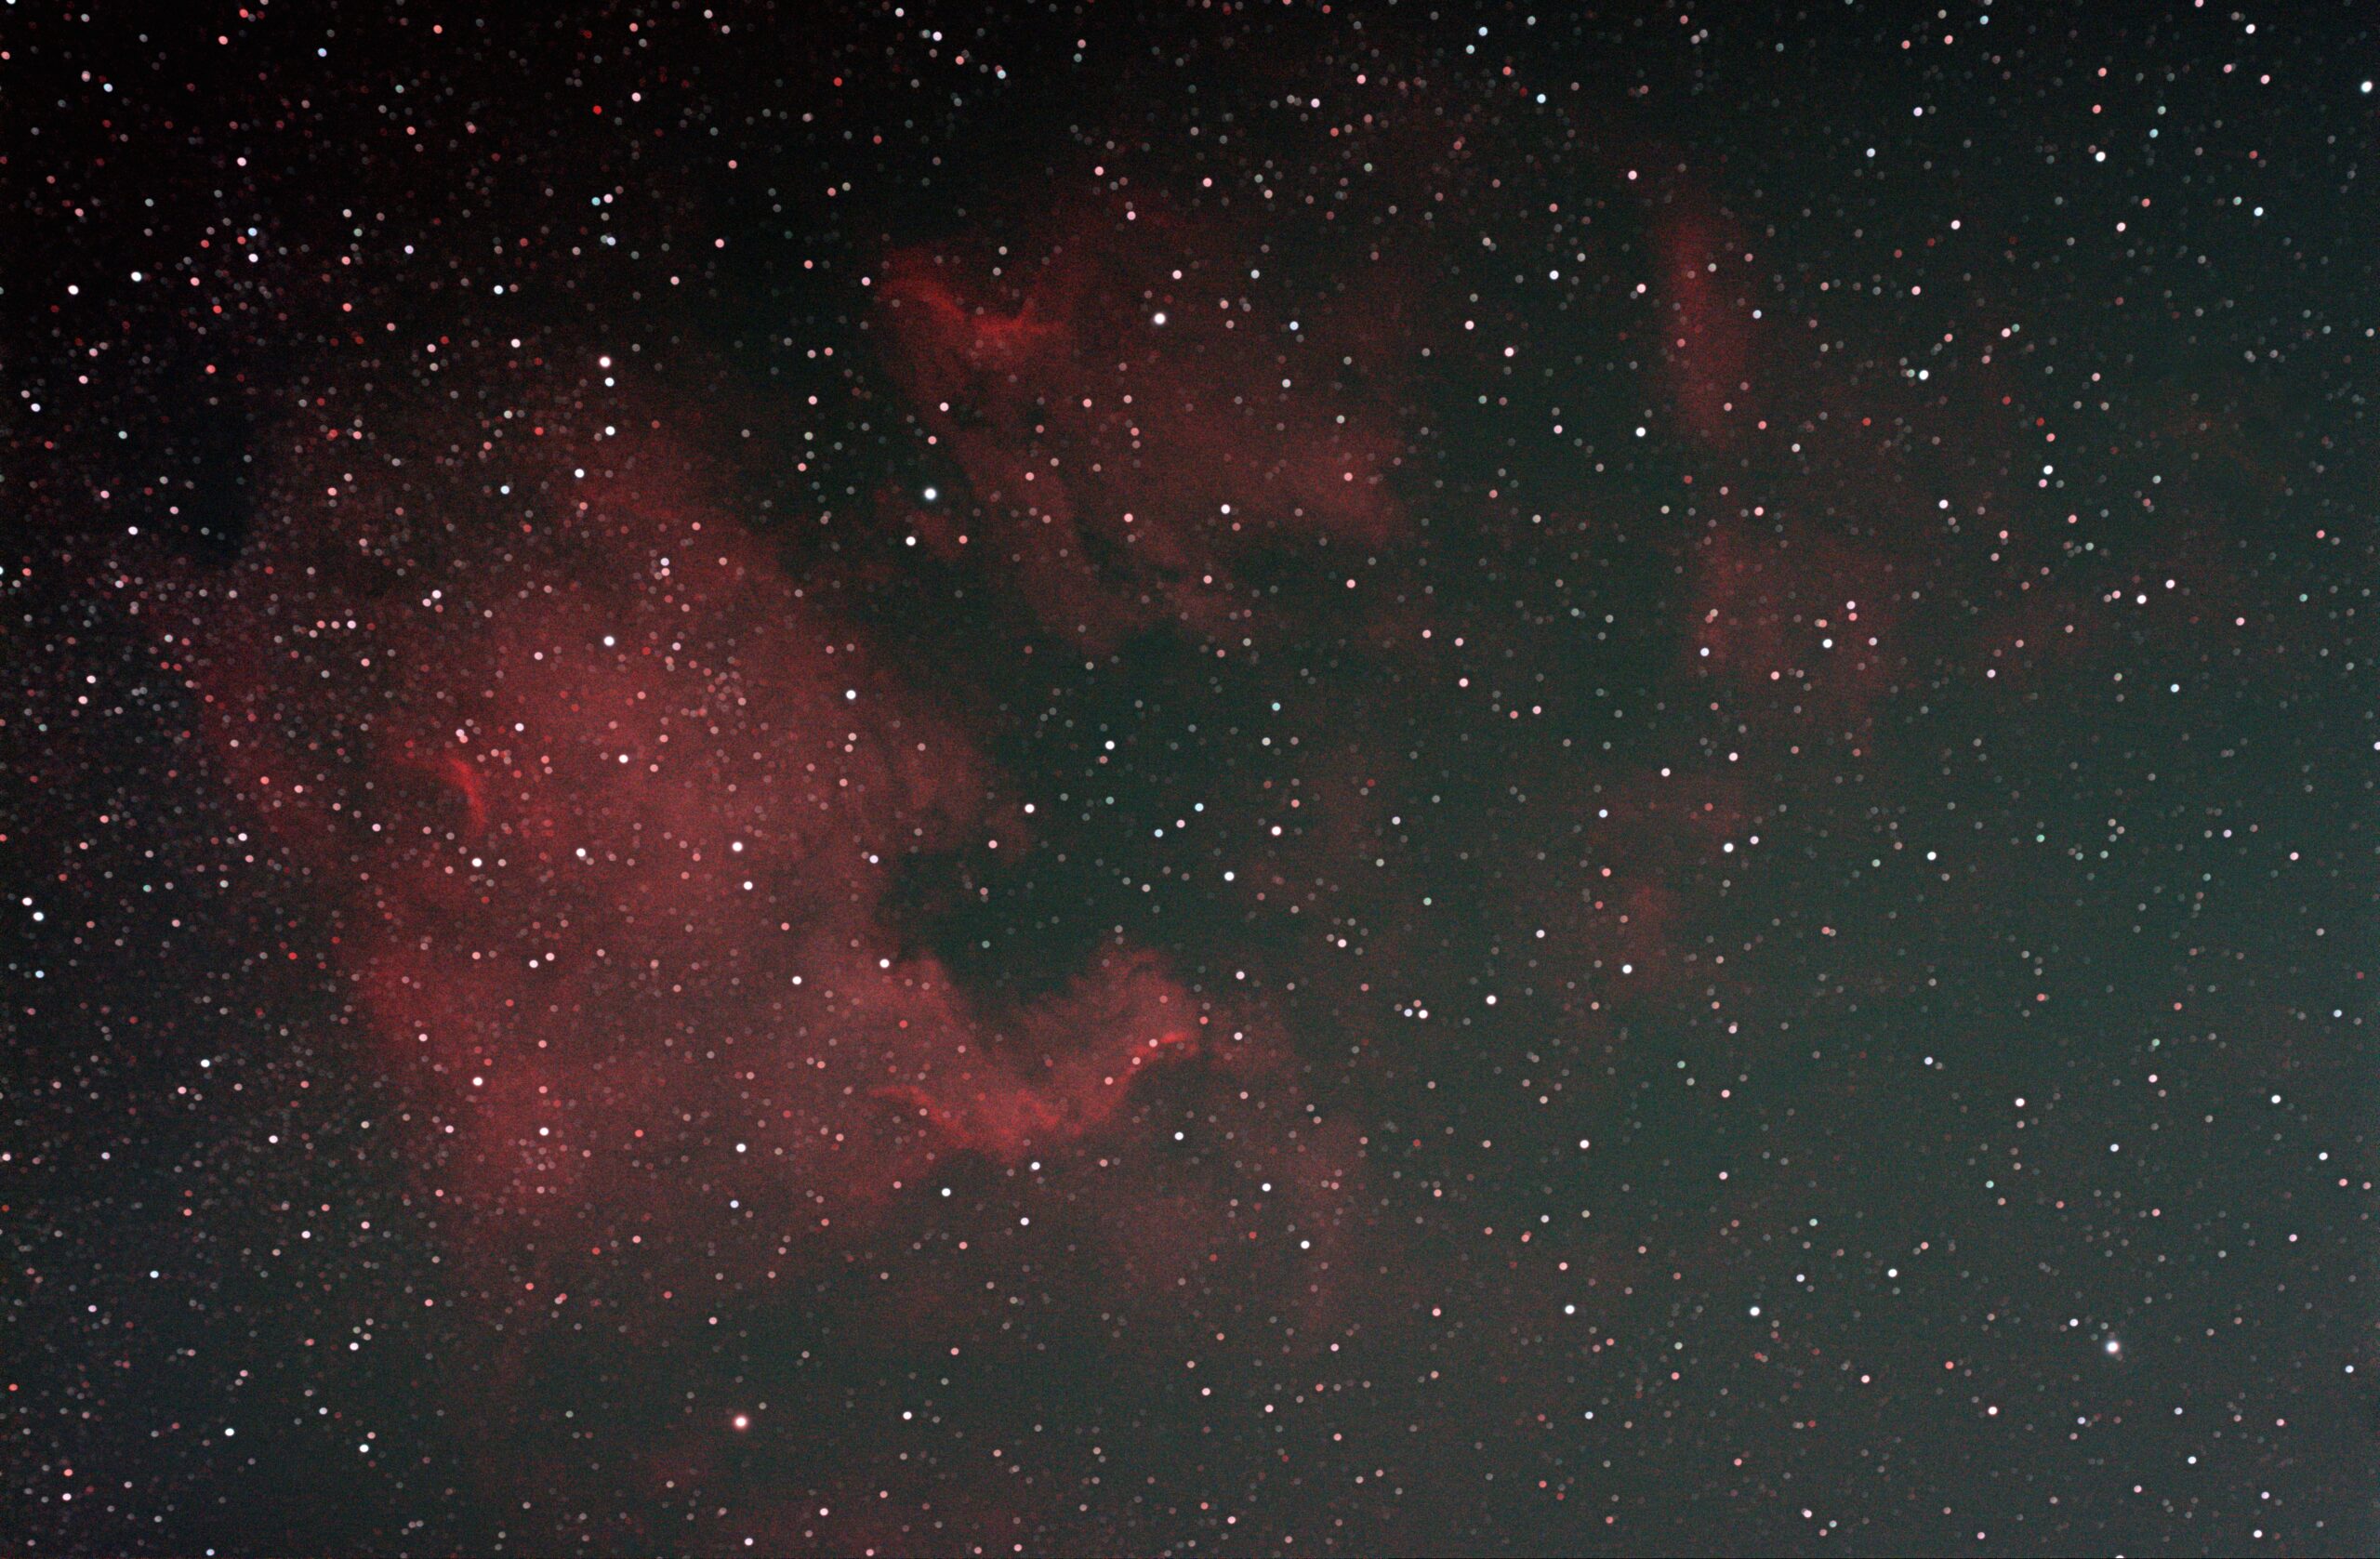 My first deep sky astrophotography image of the North American Nebula. Taken with a Redcat 51 and Fujifilm X-S10 using an Optolong L-Enhance filter.